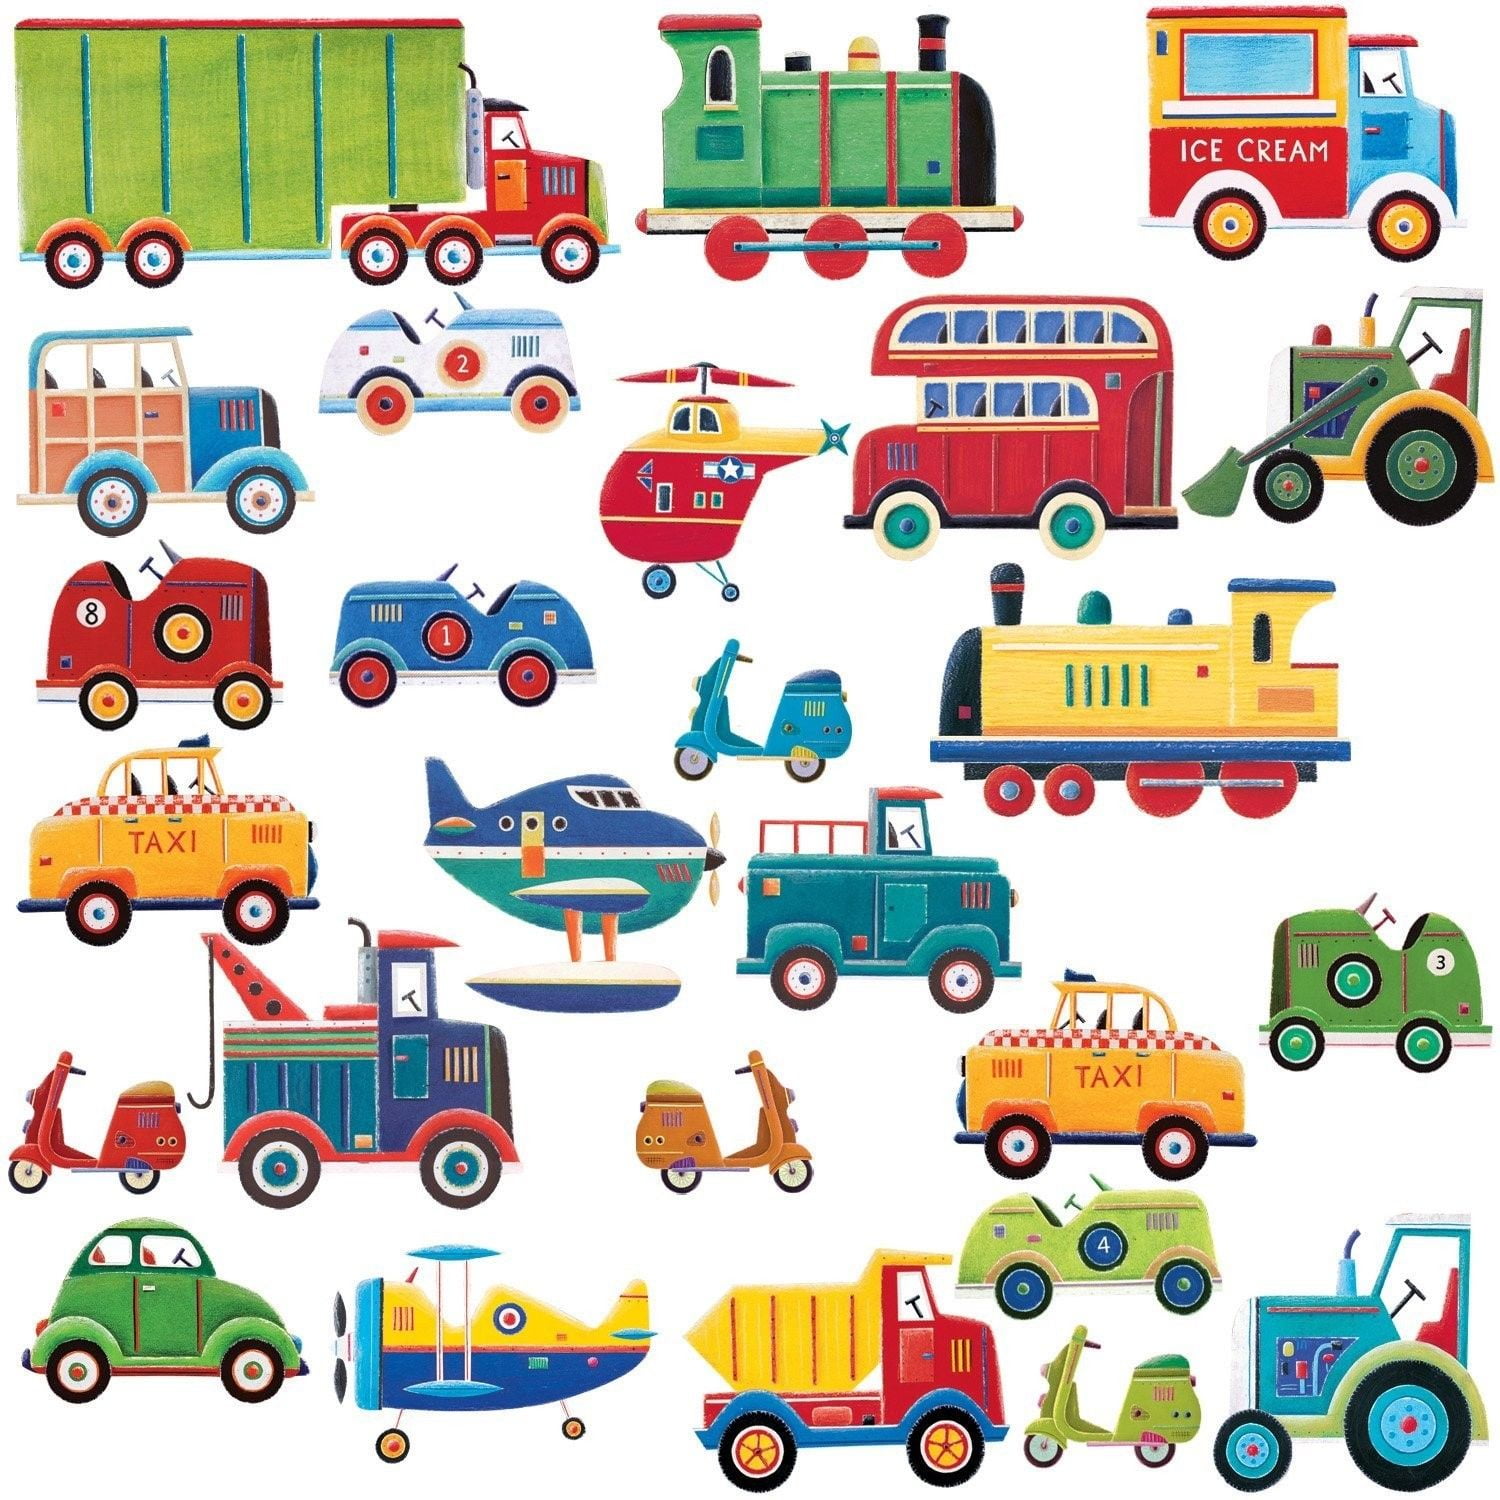 DECOWALL BS-1712 Construction Vehicles Cars Transport Kids Wall Stickers Wall Decals Peel and Stick Removable Wall Stickers for Kids Nursery Bedroom Living Room décor 